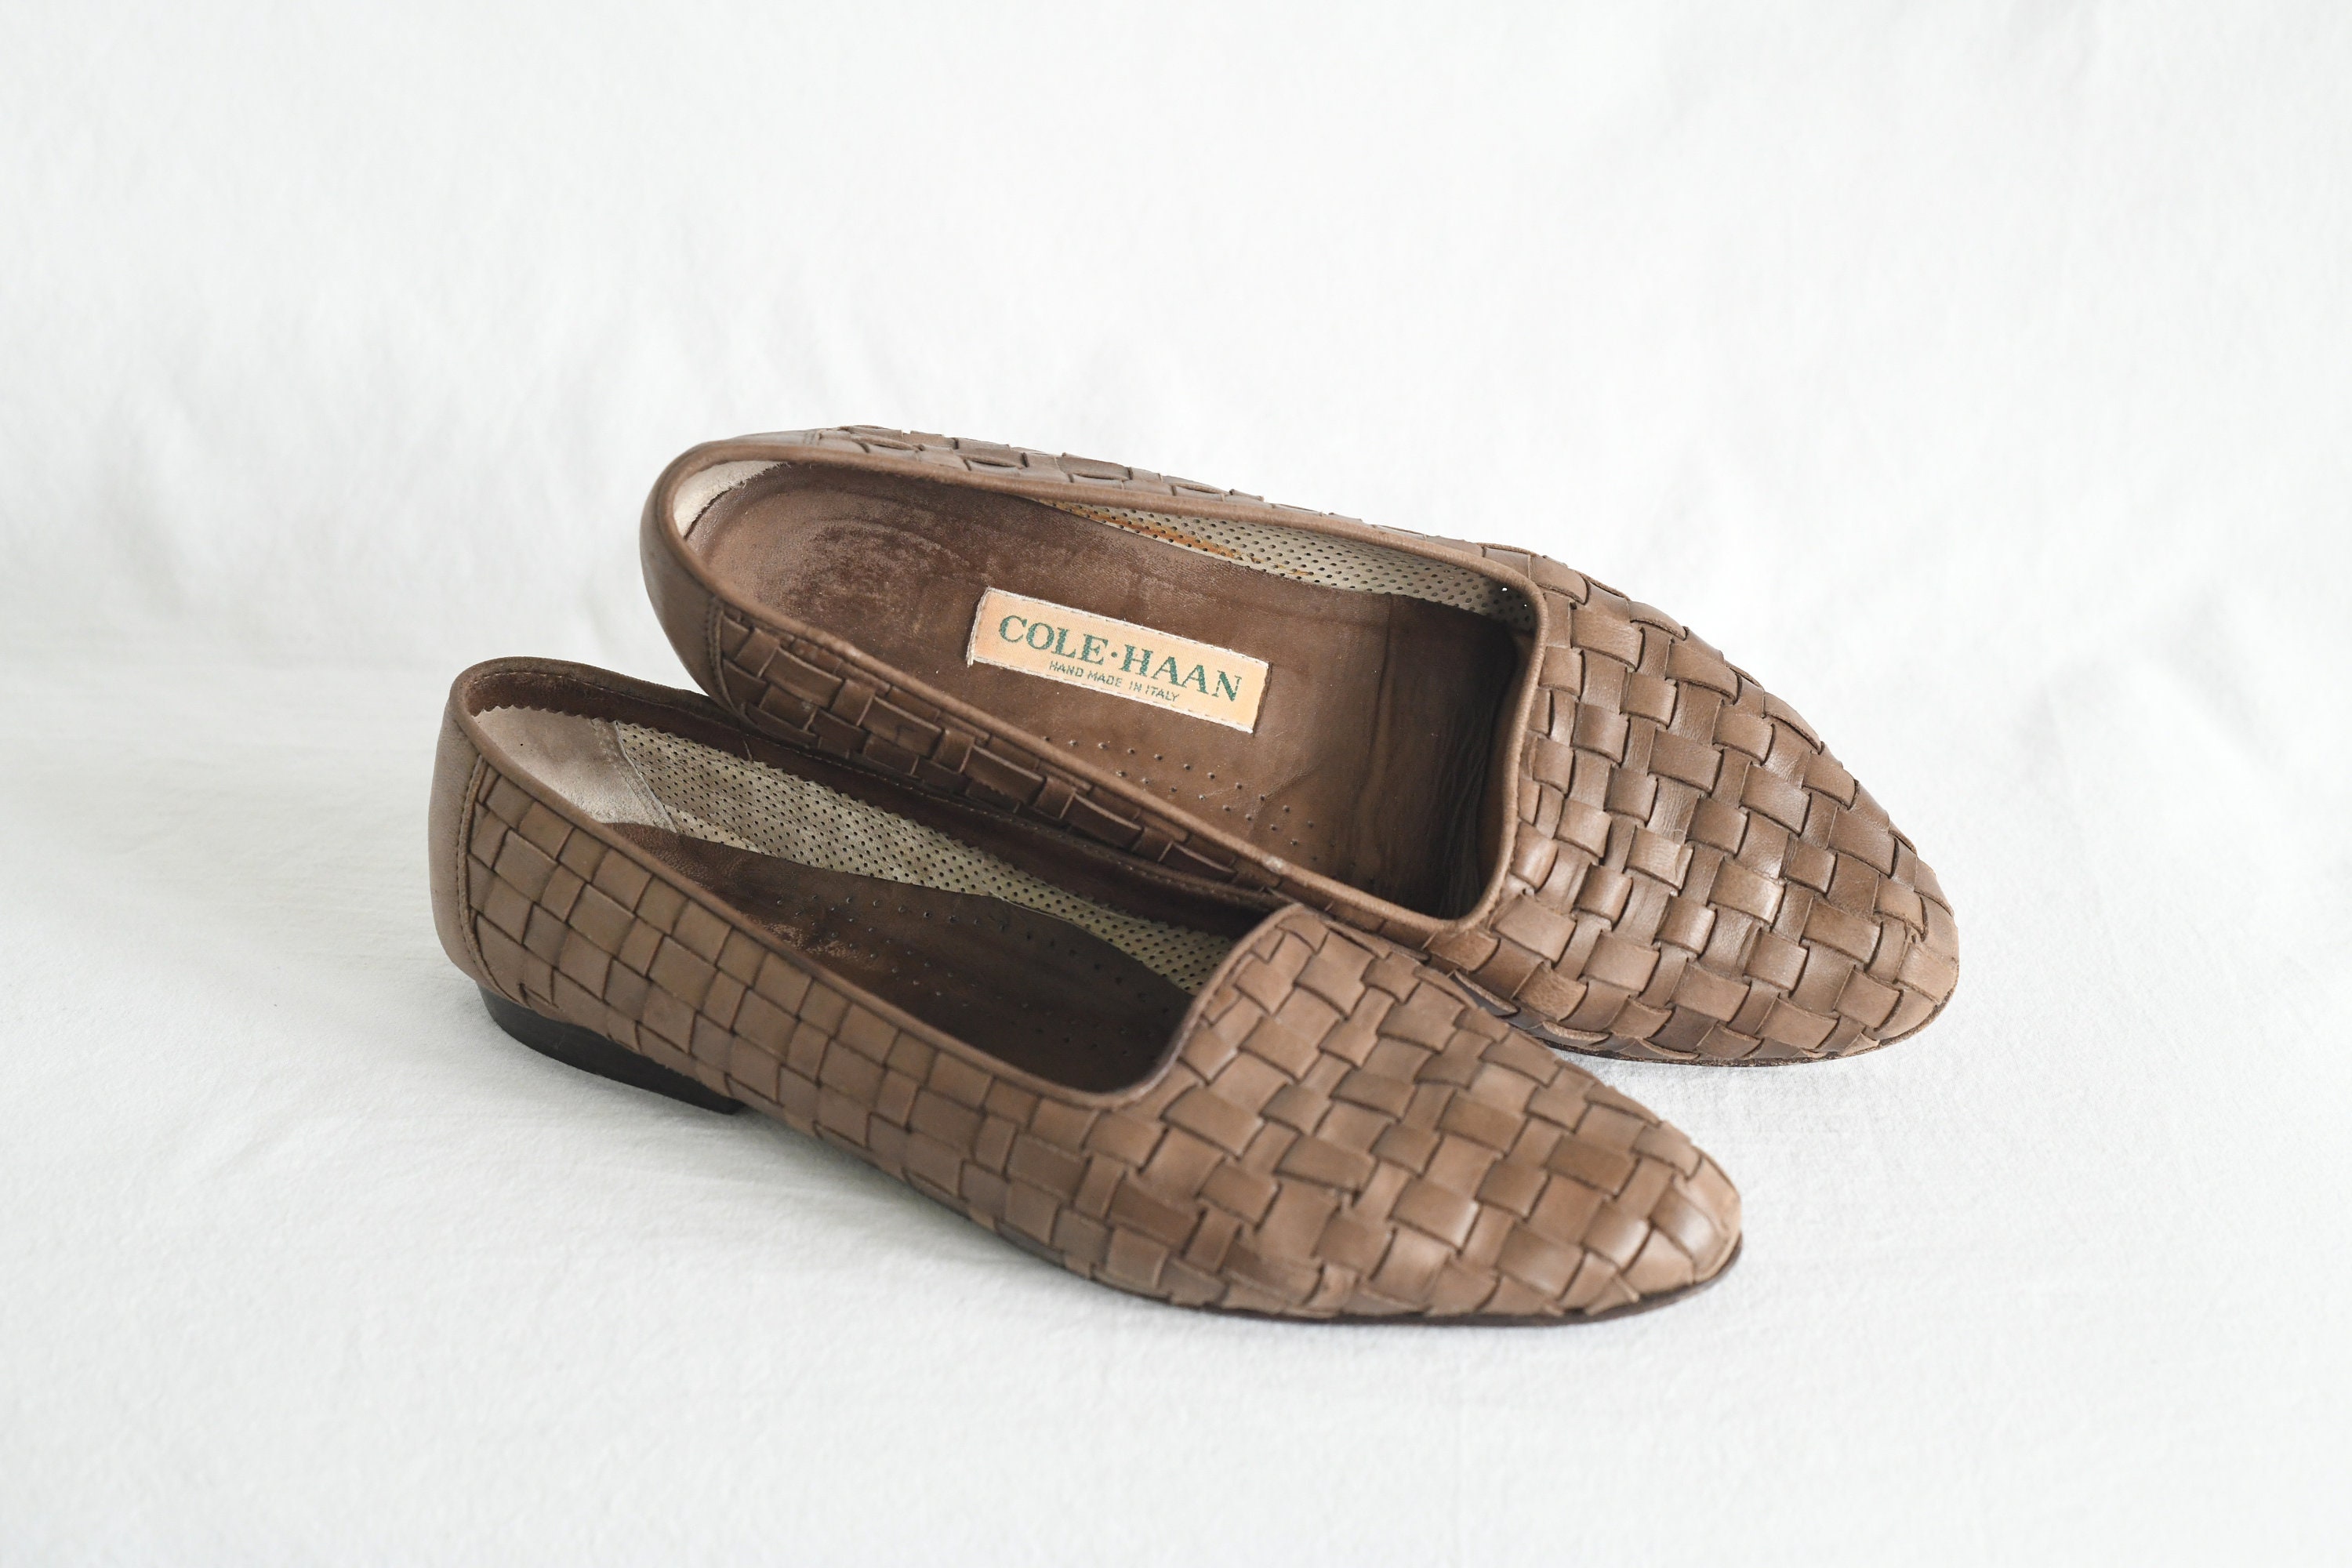 Stay Fashionable and Timeless with Vintage Cole Haan Shoes